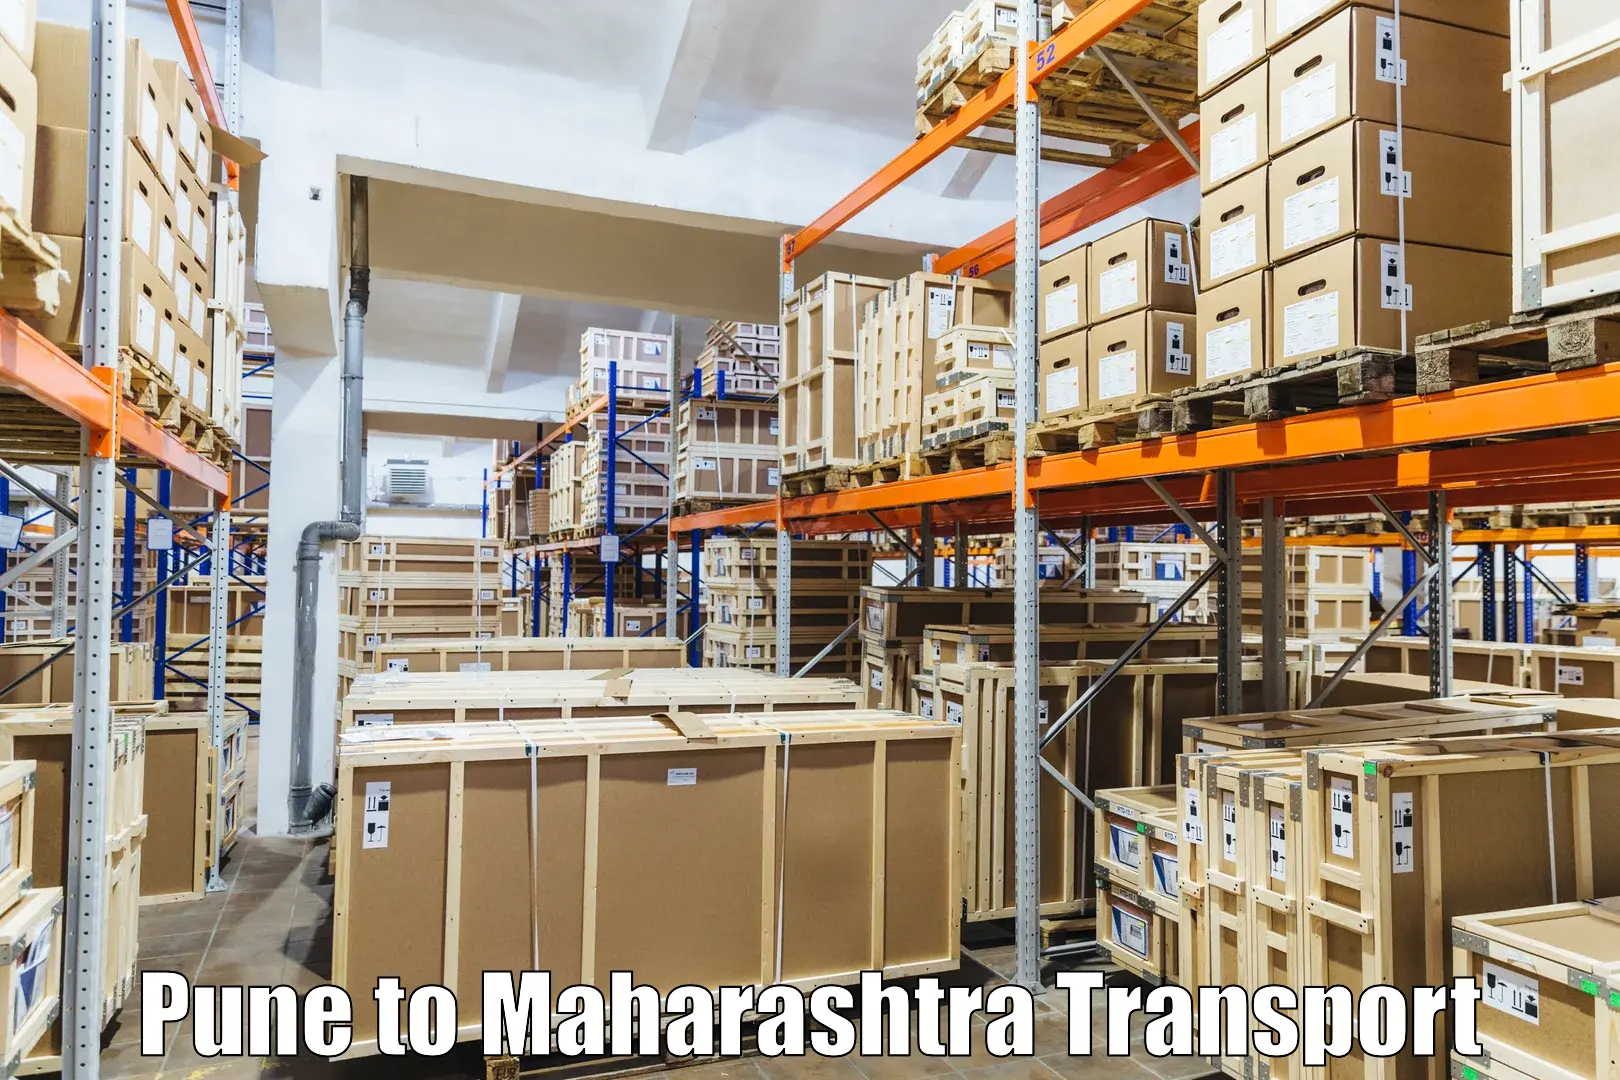 Domestic goods transportation services in Pune to Maharashtra